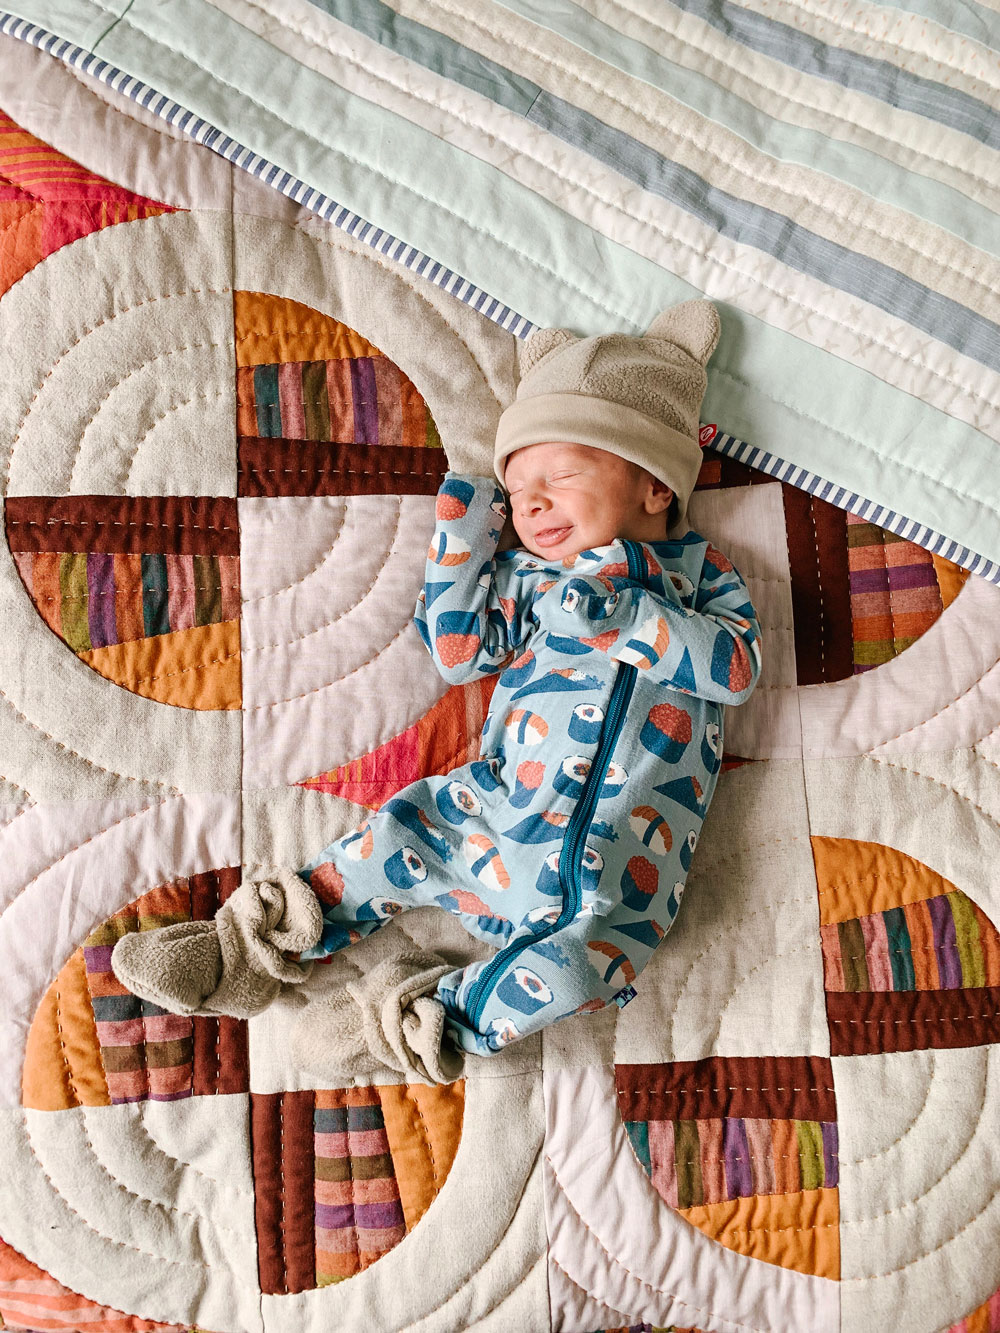 Desi on his baby Modern Fans quilt